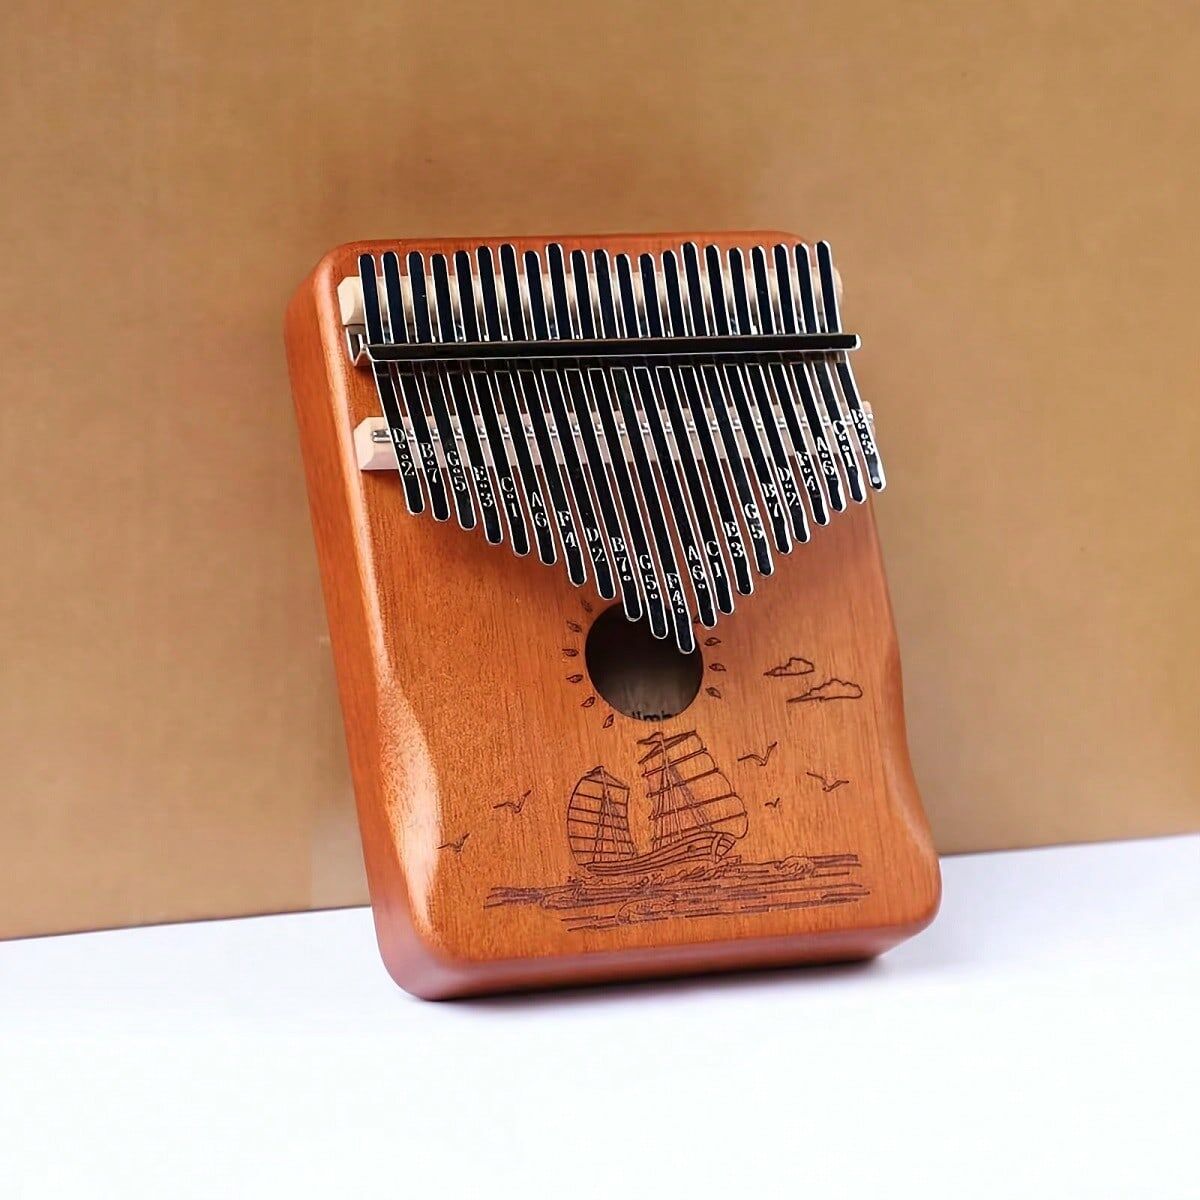 SHEIN Kalimba Thumb Piano 21 Keys Thumbsticks Organs Beginners Musical Instruments Musical Instruments Gift,Christmas And Halloween Gift,Thanksgiving Gift Brown one-size